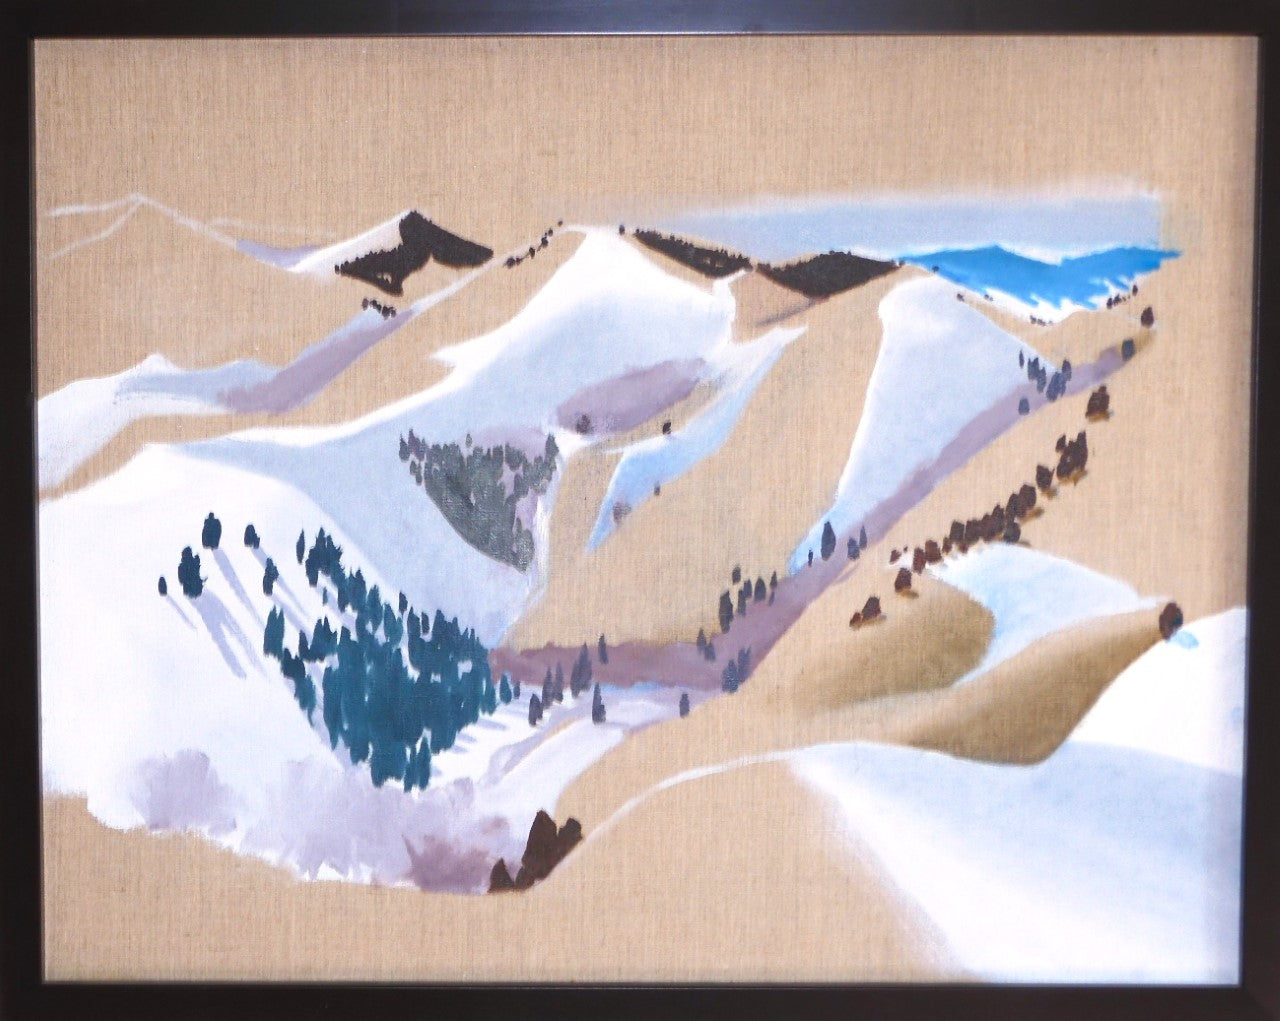 Original oil on linen  Snow on the foothills  Painted on open canvas allowing the linen to become part of the painting  Framed in a black wooden frame  28" long x 22" high original oil  D-ring and wire on the back for hanging